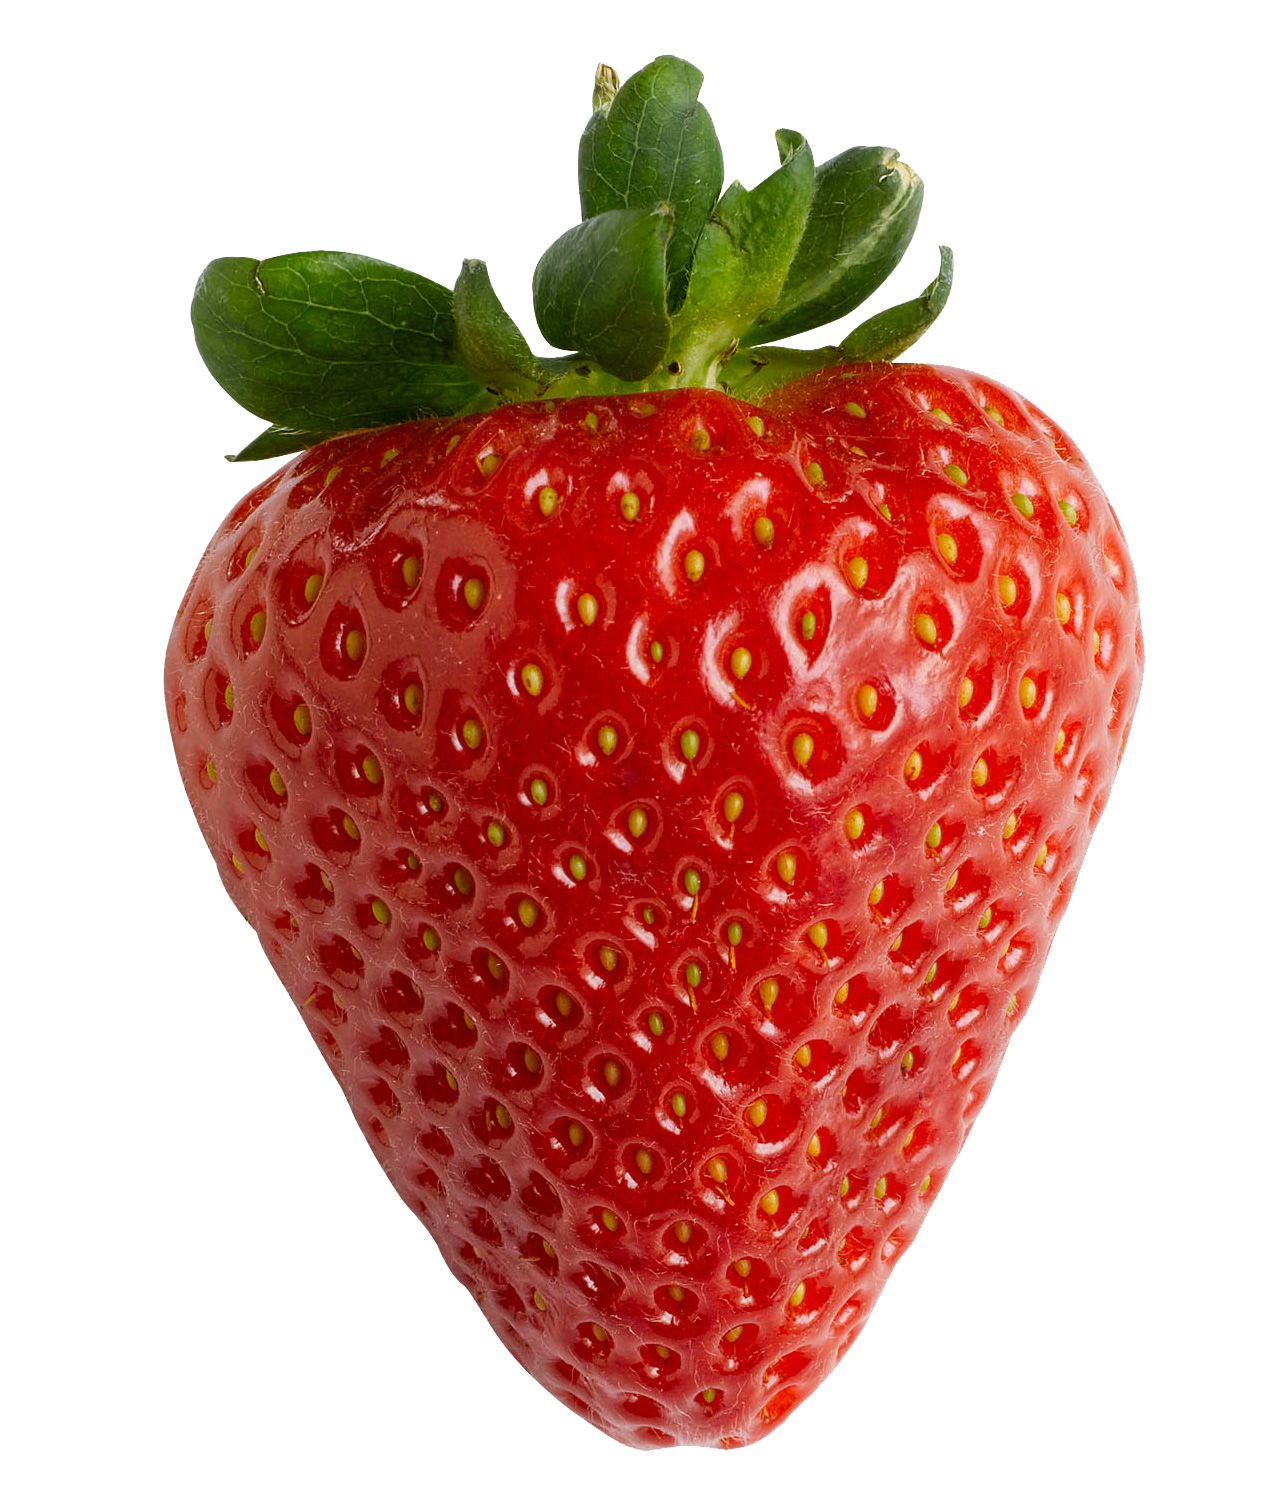 Free Strawberry PNG Transparent Images, Download Free Strawberry PNG